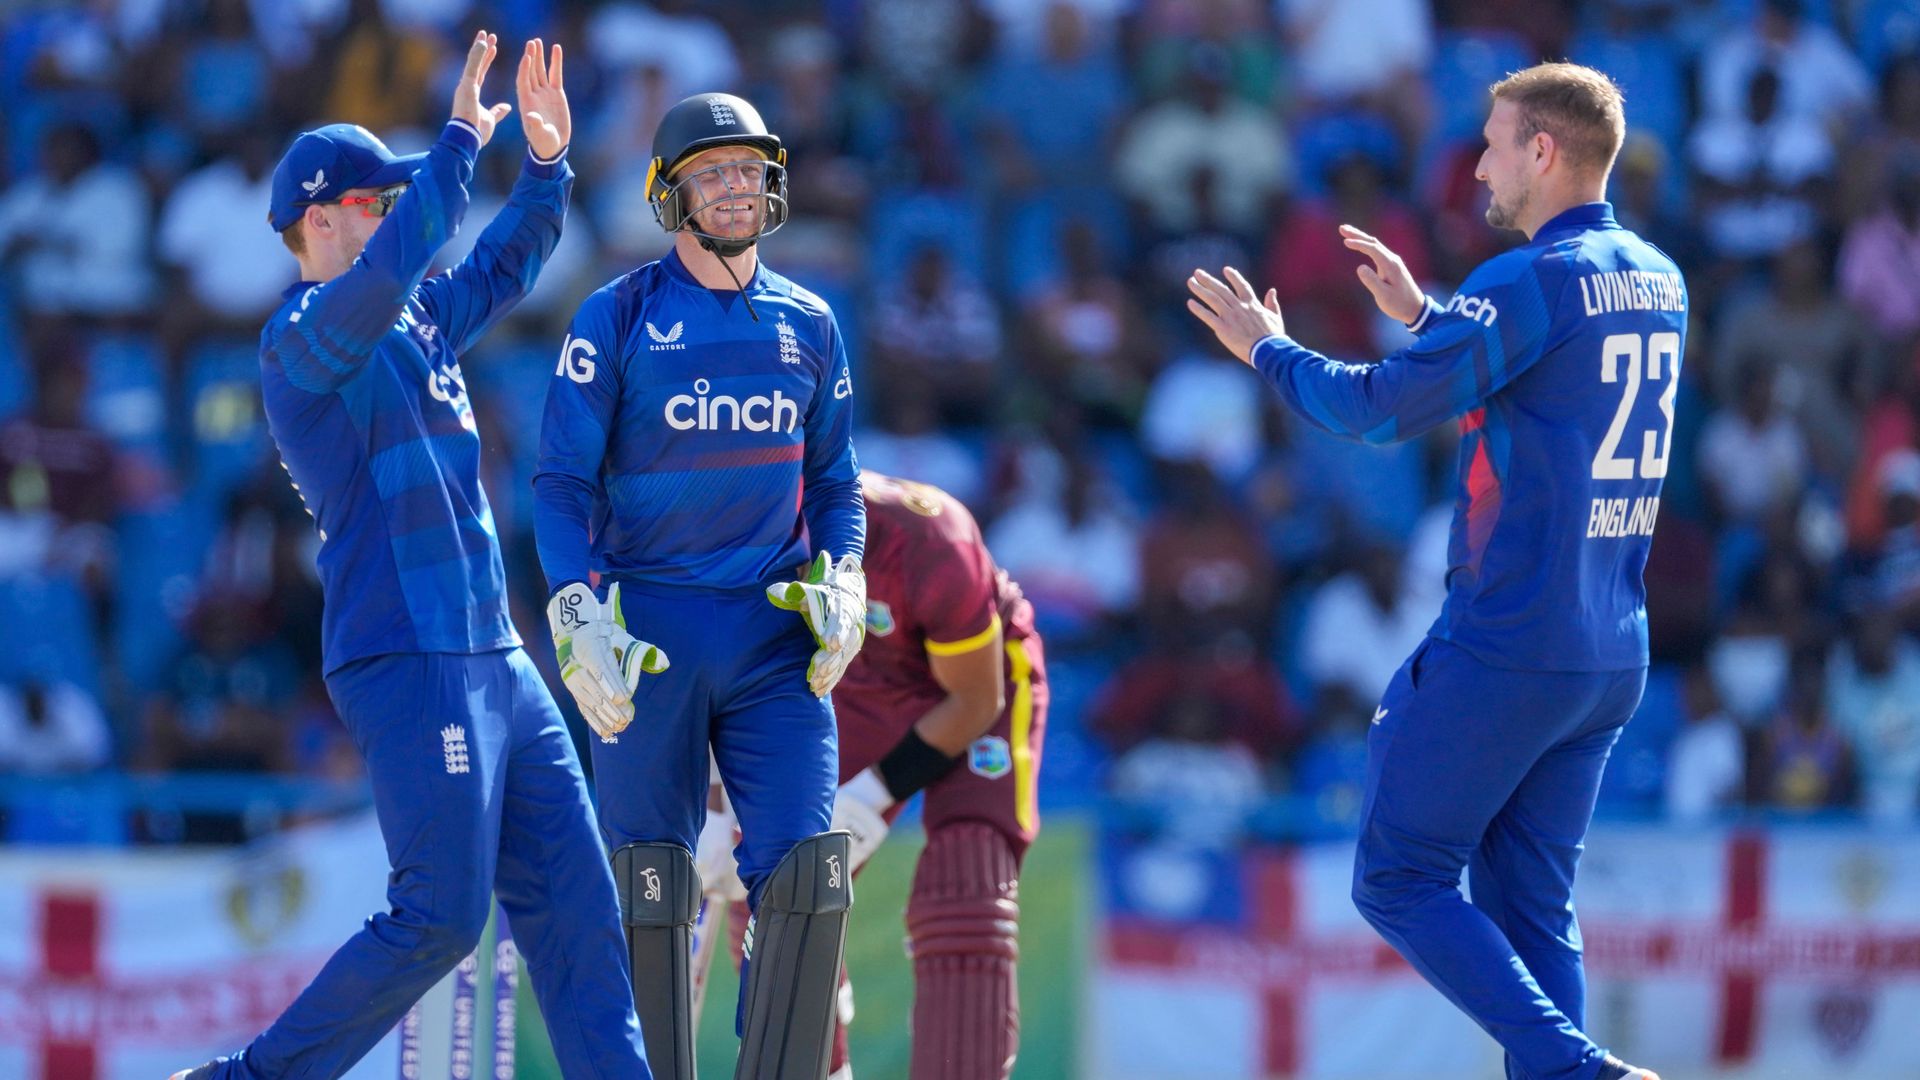 West Indies three down in chase of 326 to beat England LIVE!